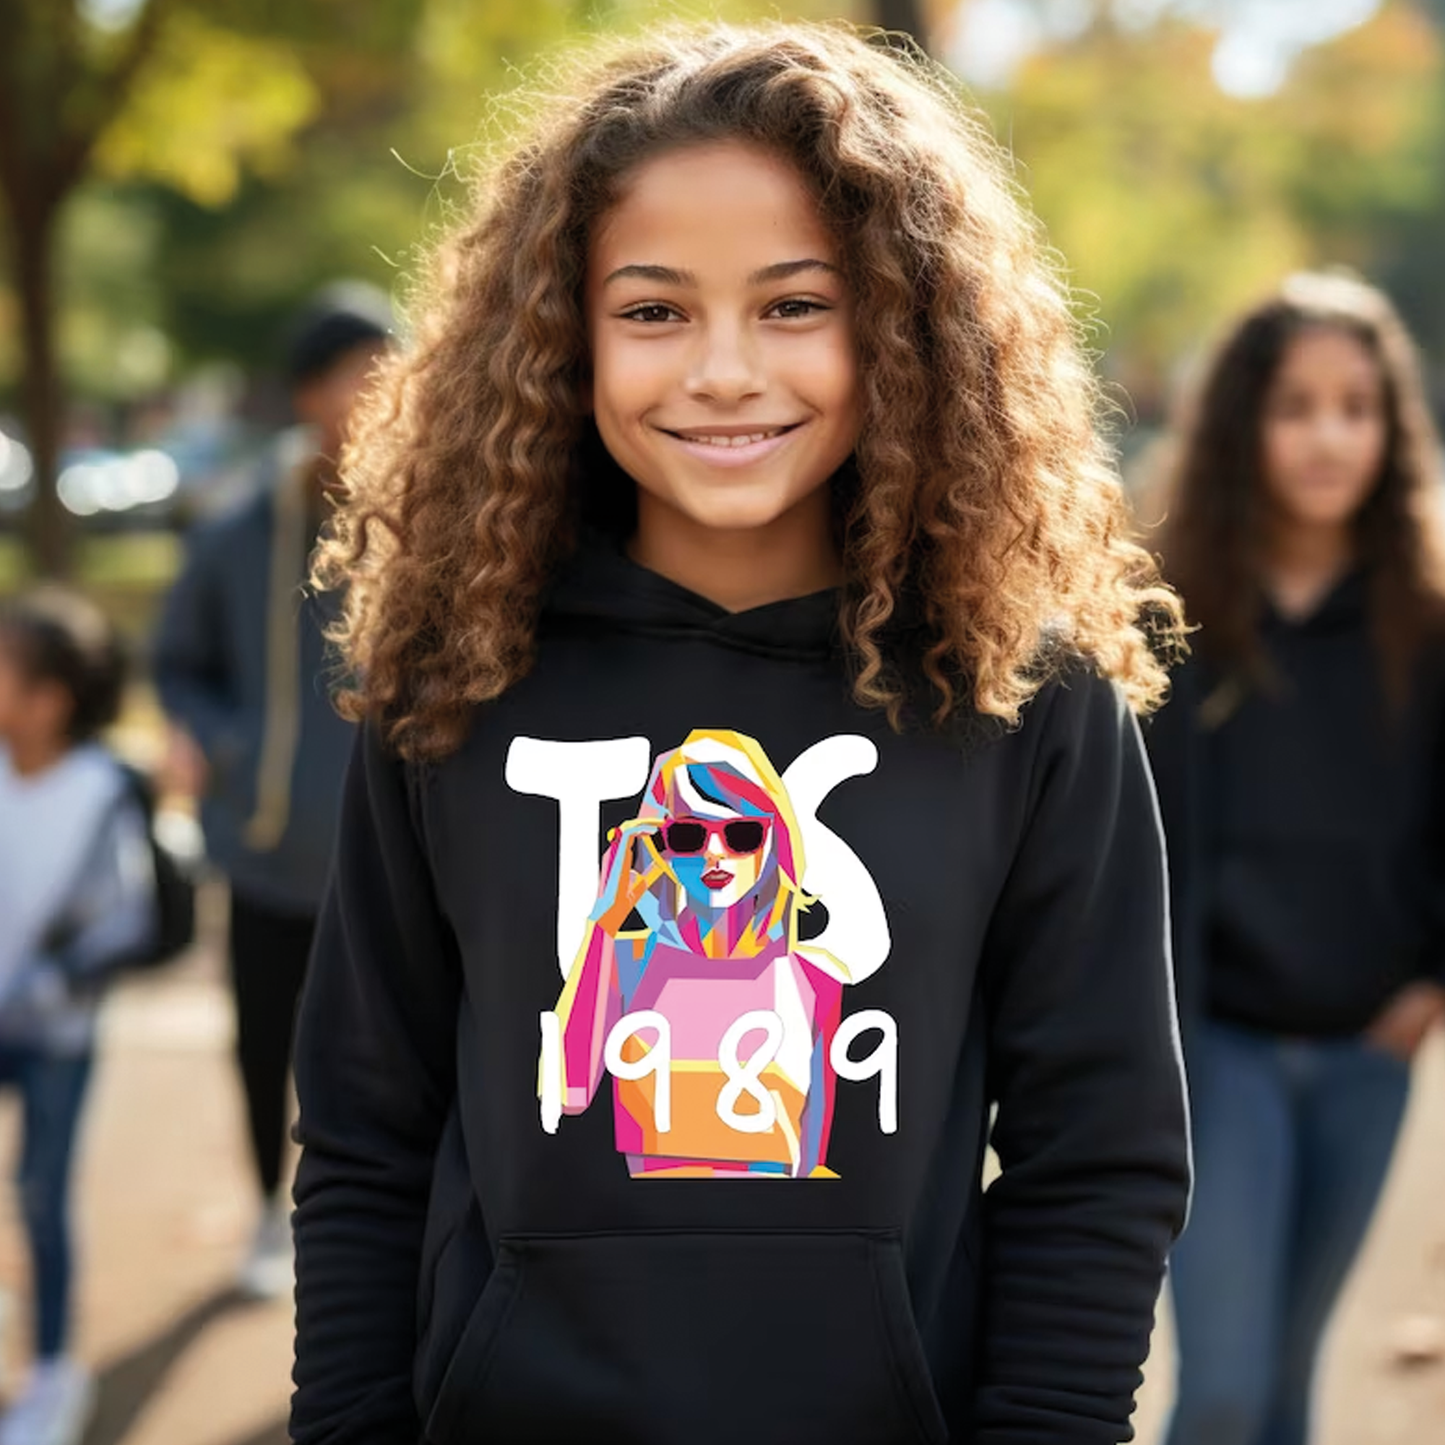 TS 1989 Graphic Hoodie - personalised options!